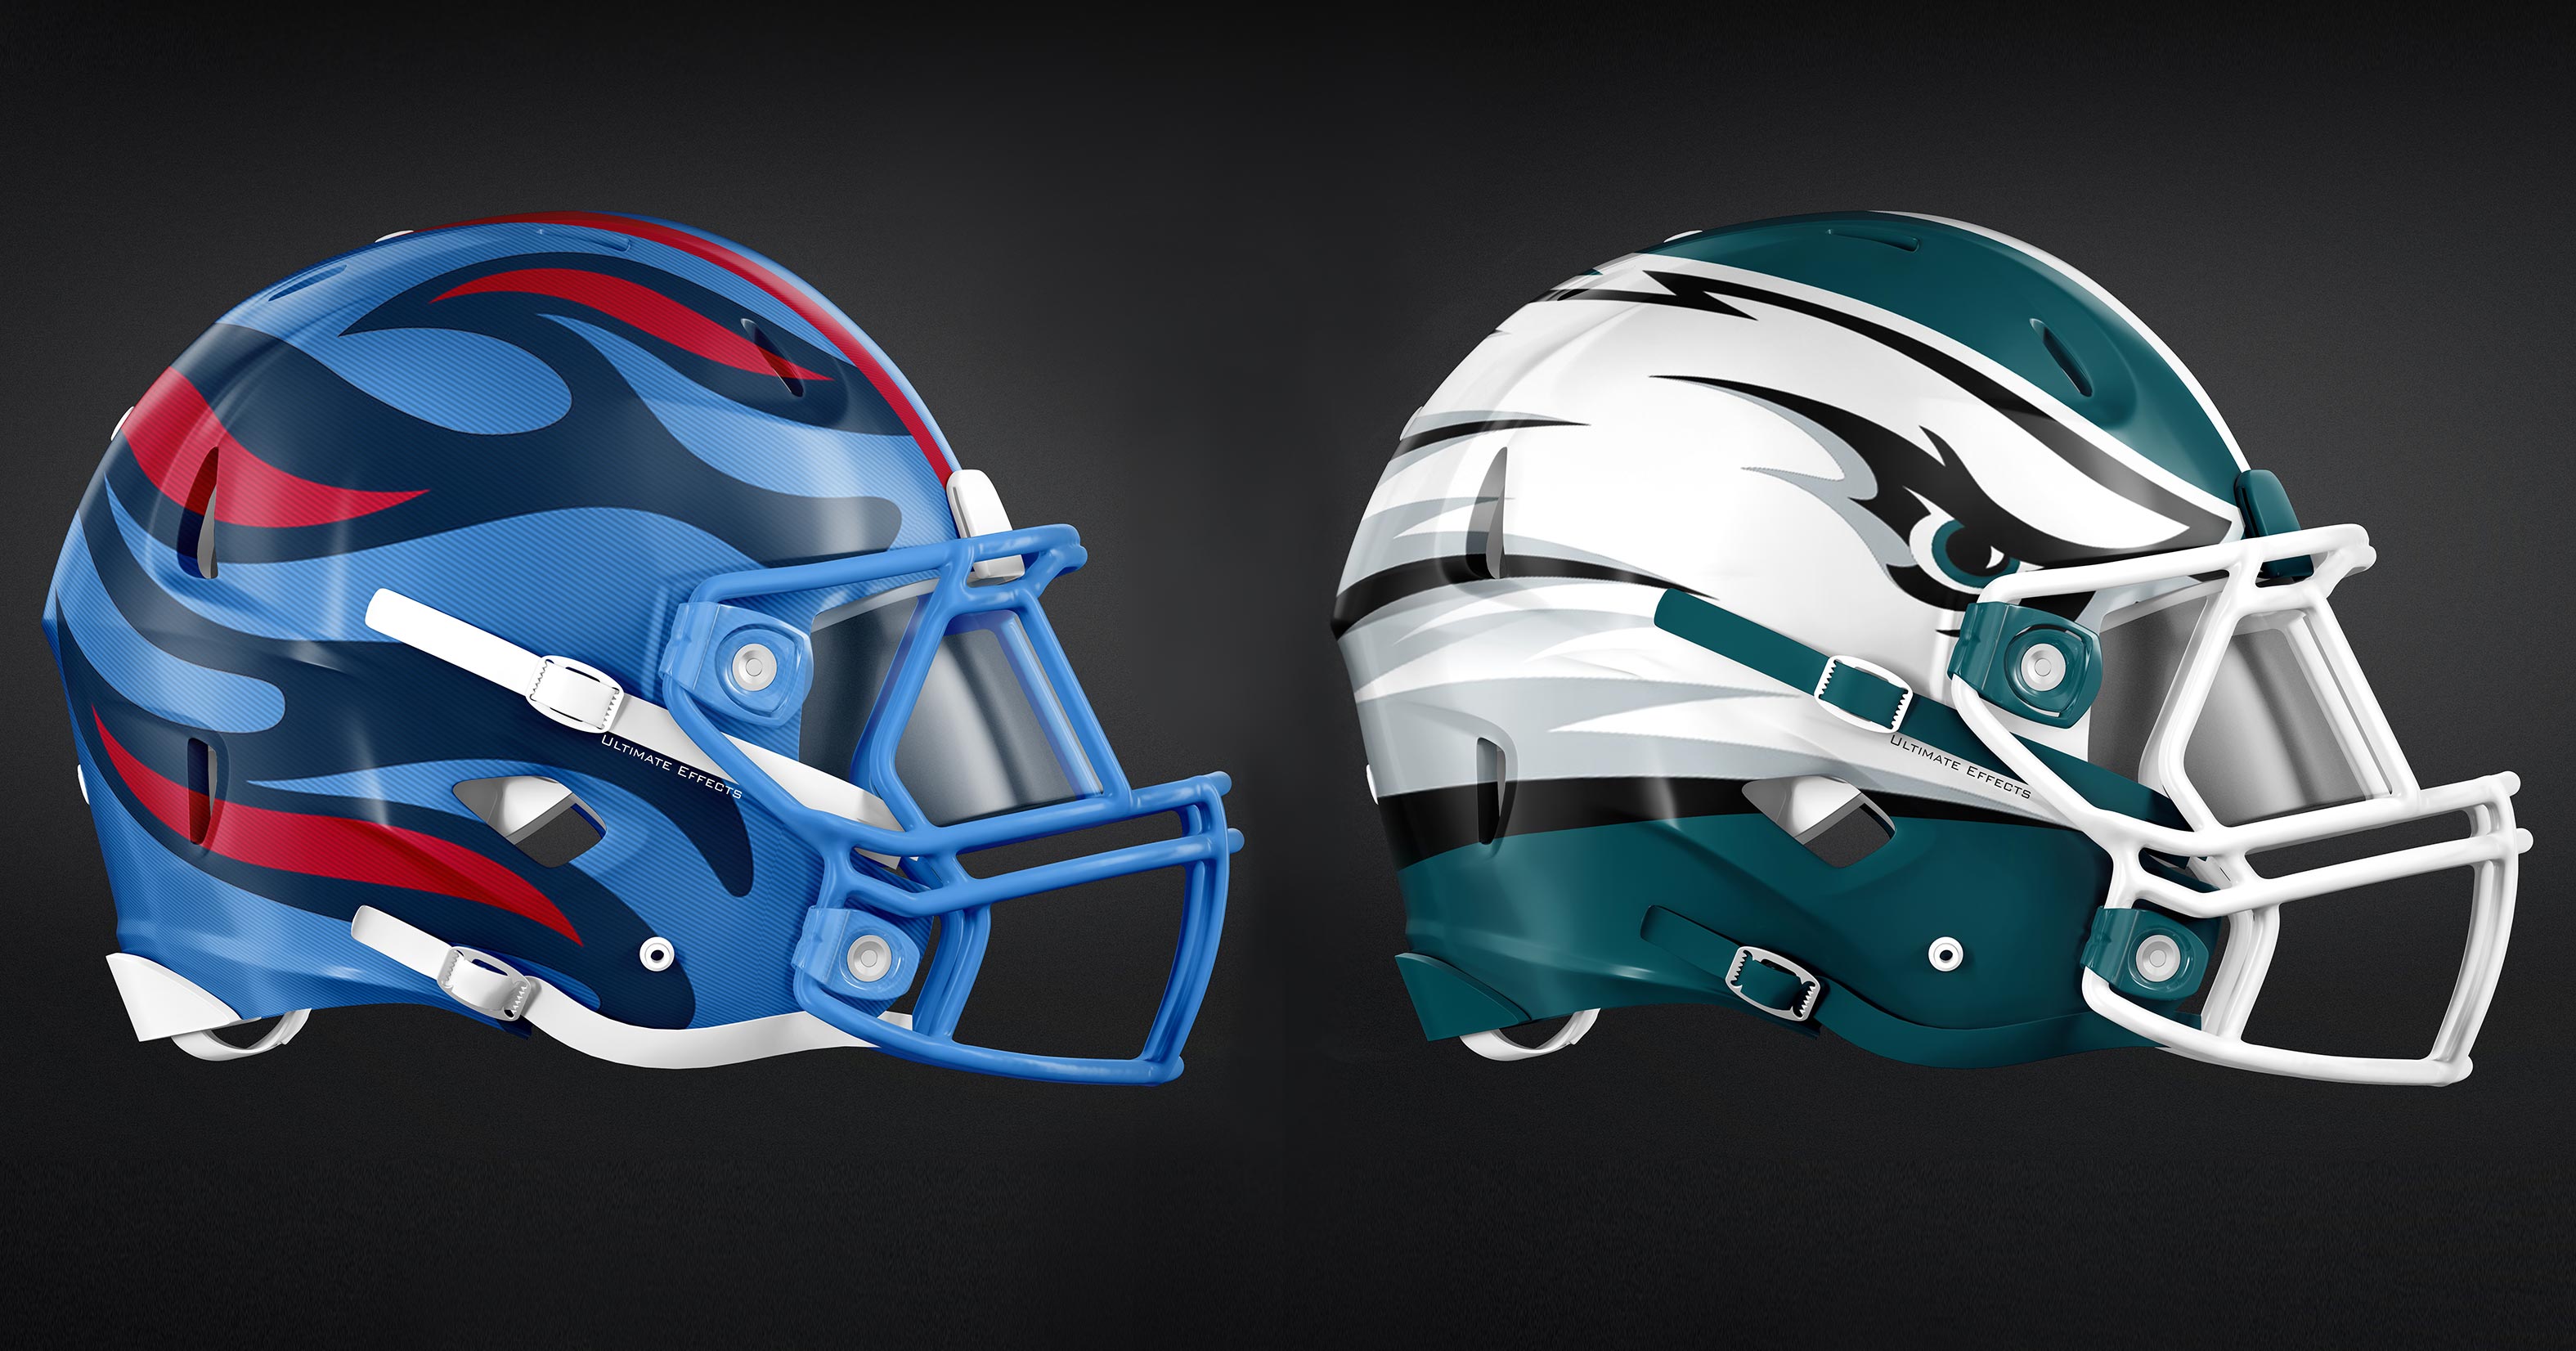 Designer Creates Awesome Concept Helmets For All 32 NFL Teams (PICS)